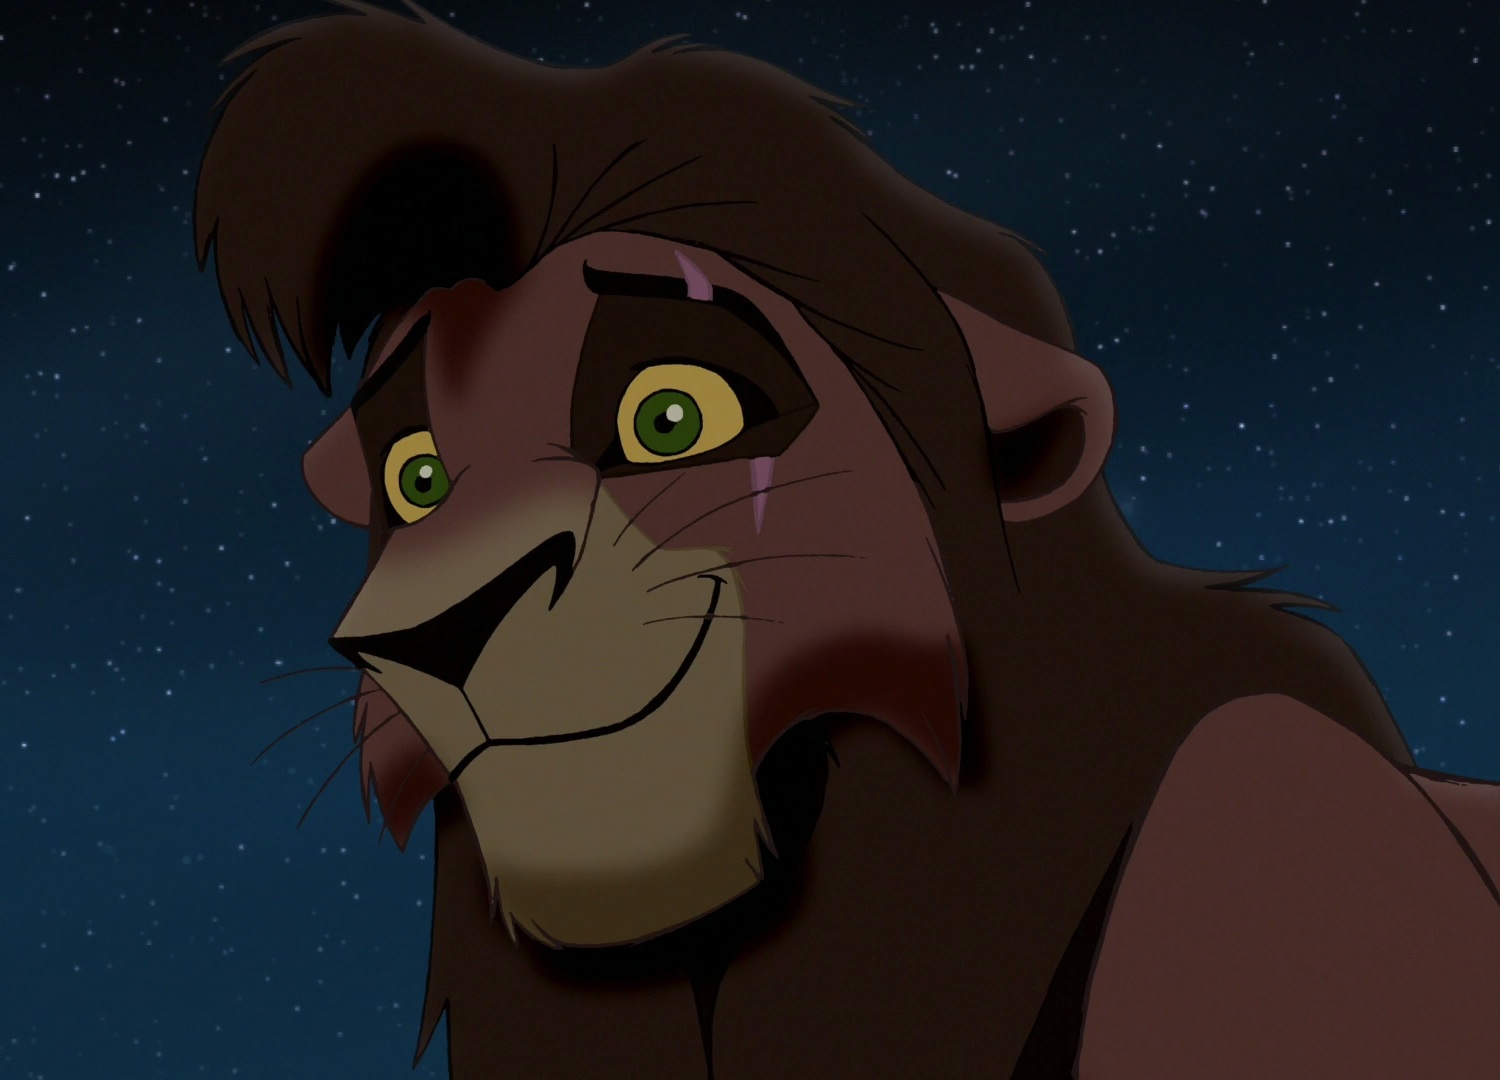 watch lion king 2 for free online without downloading